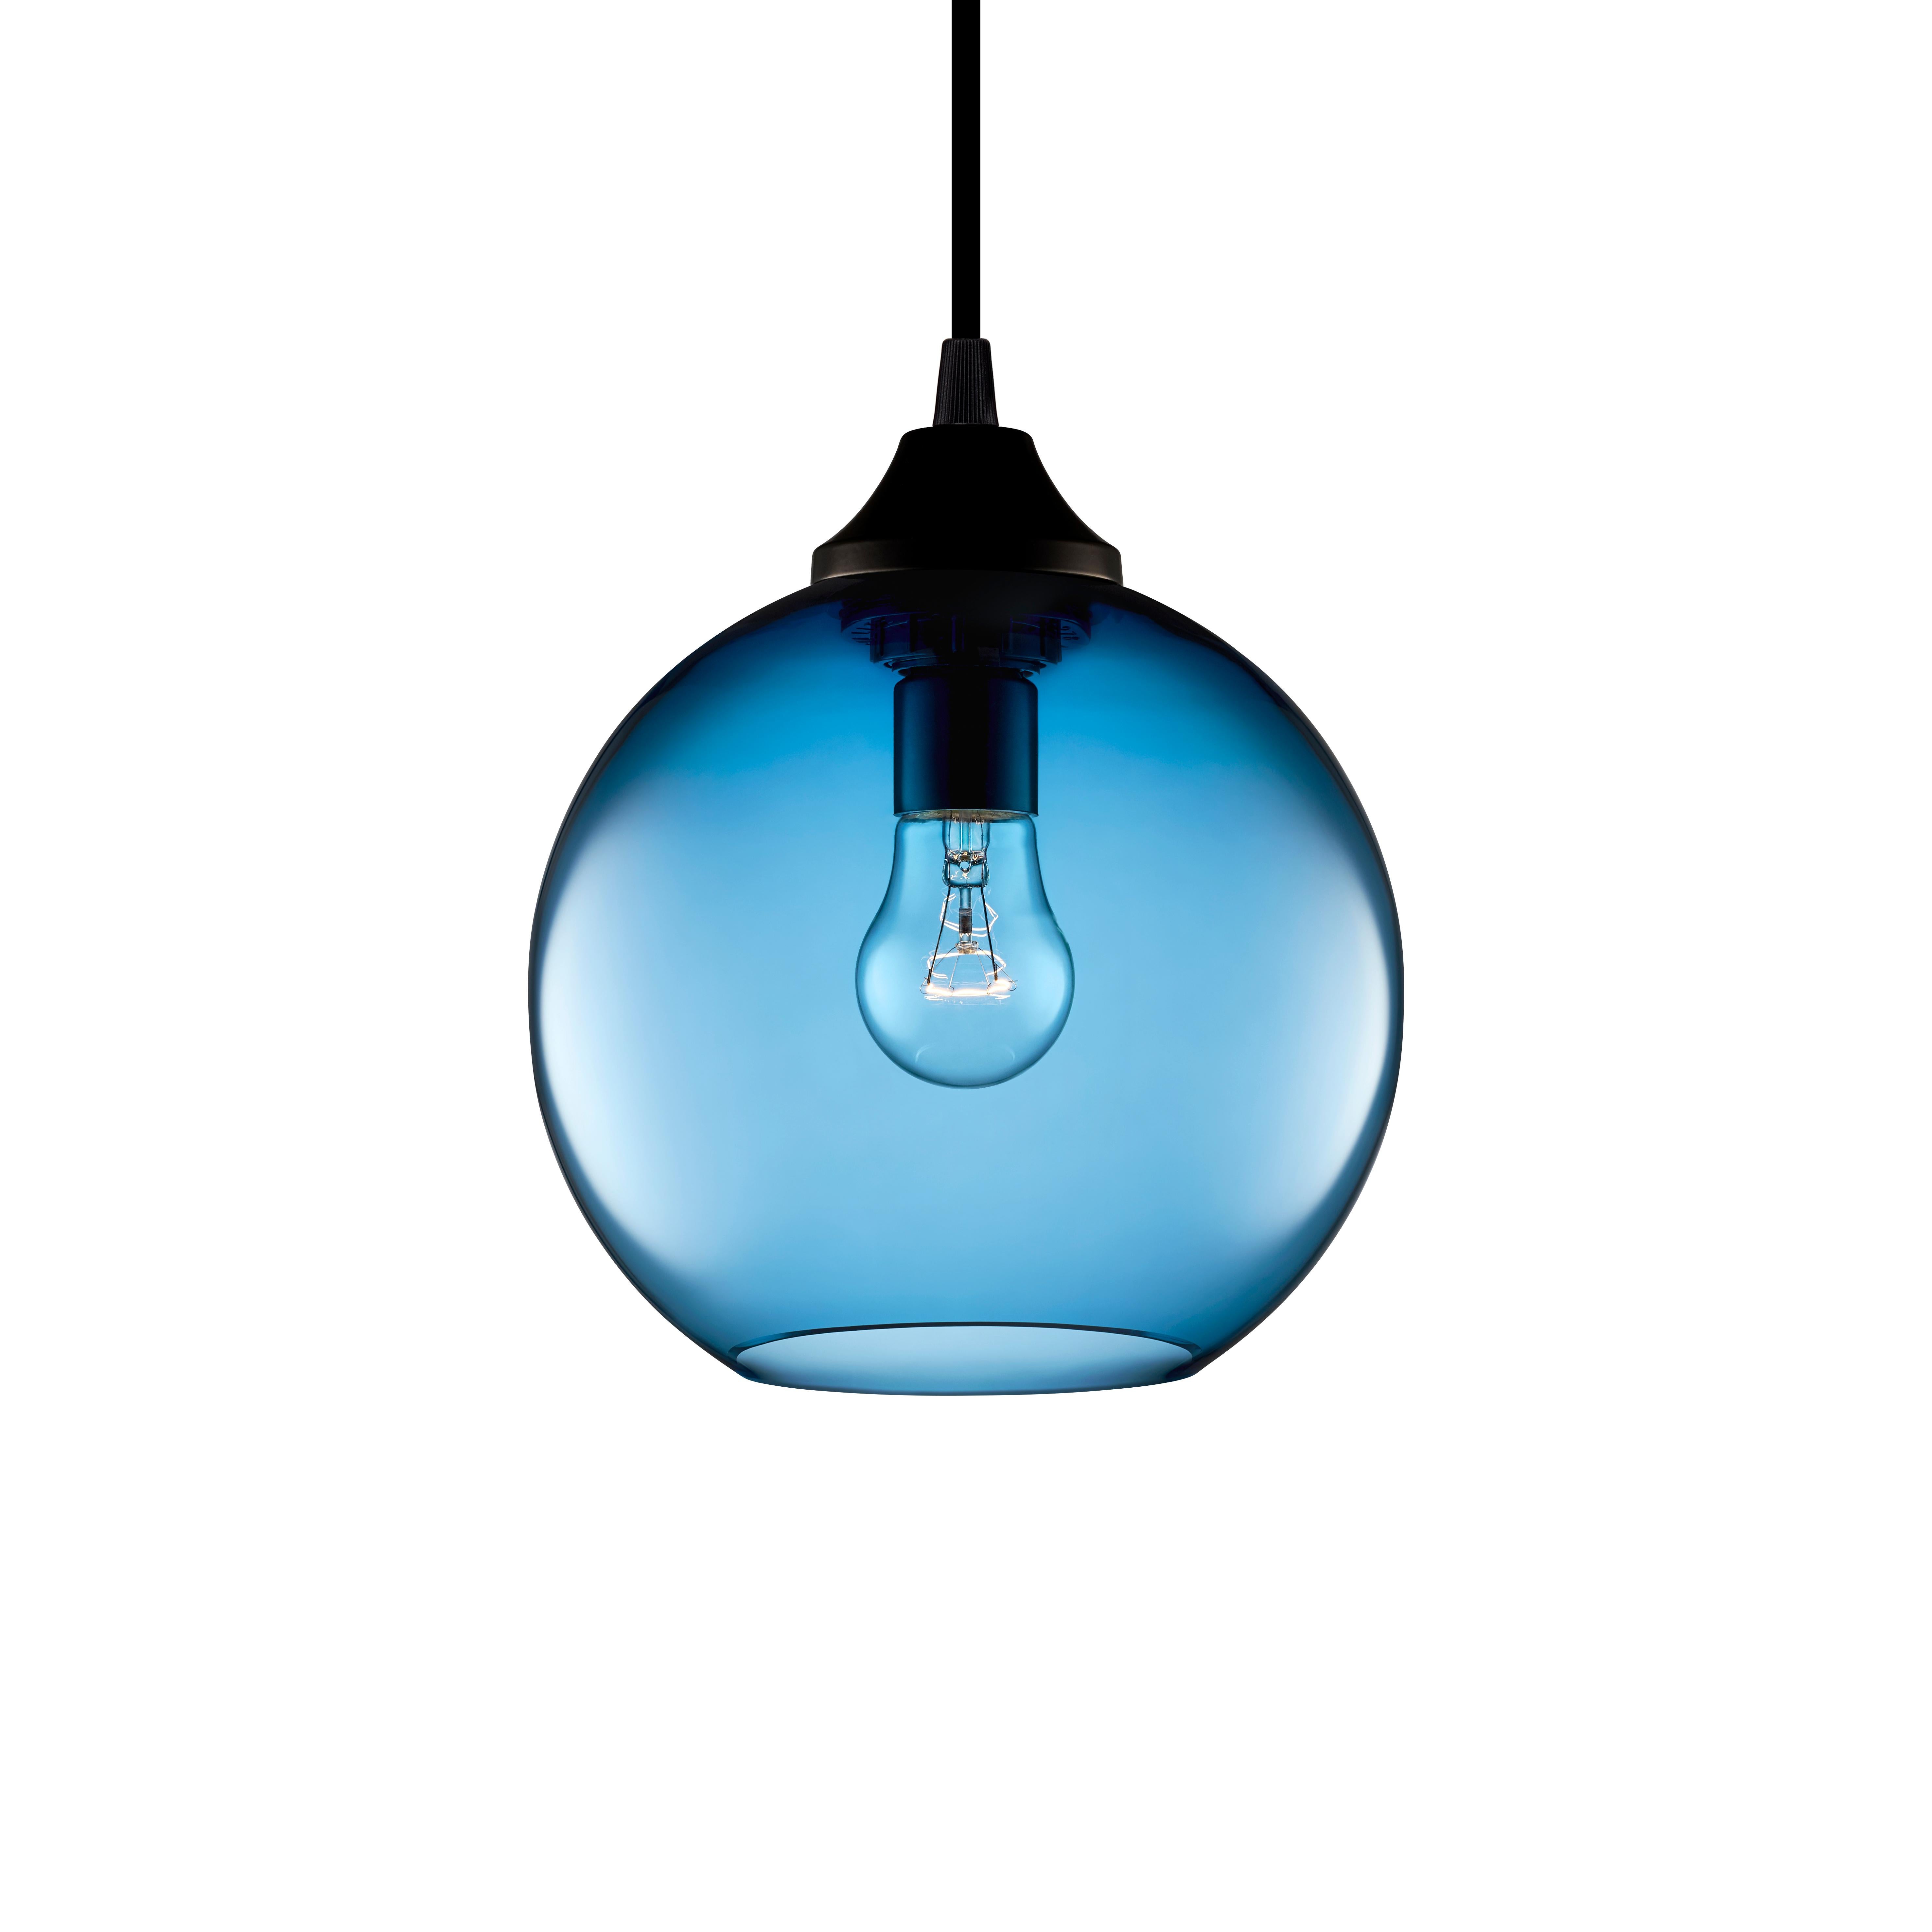 Contemporary Solitaire Petite Smoke Handblown Modern Glass Pendant Light, Made in the USA For Sale